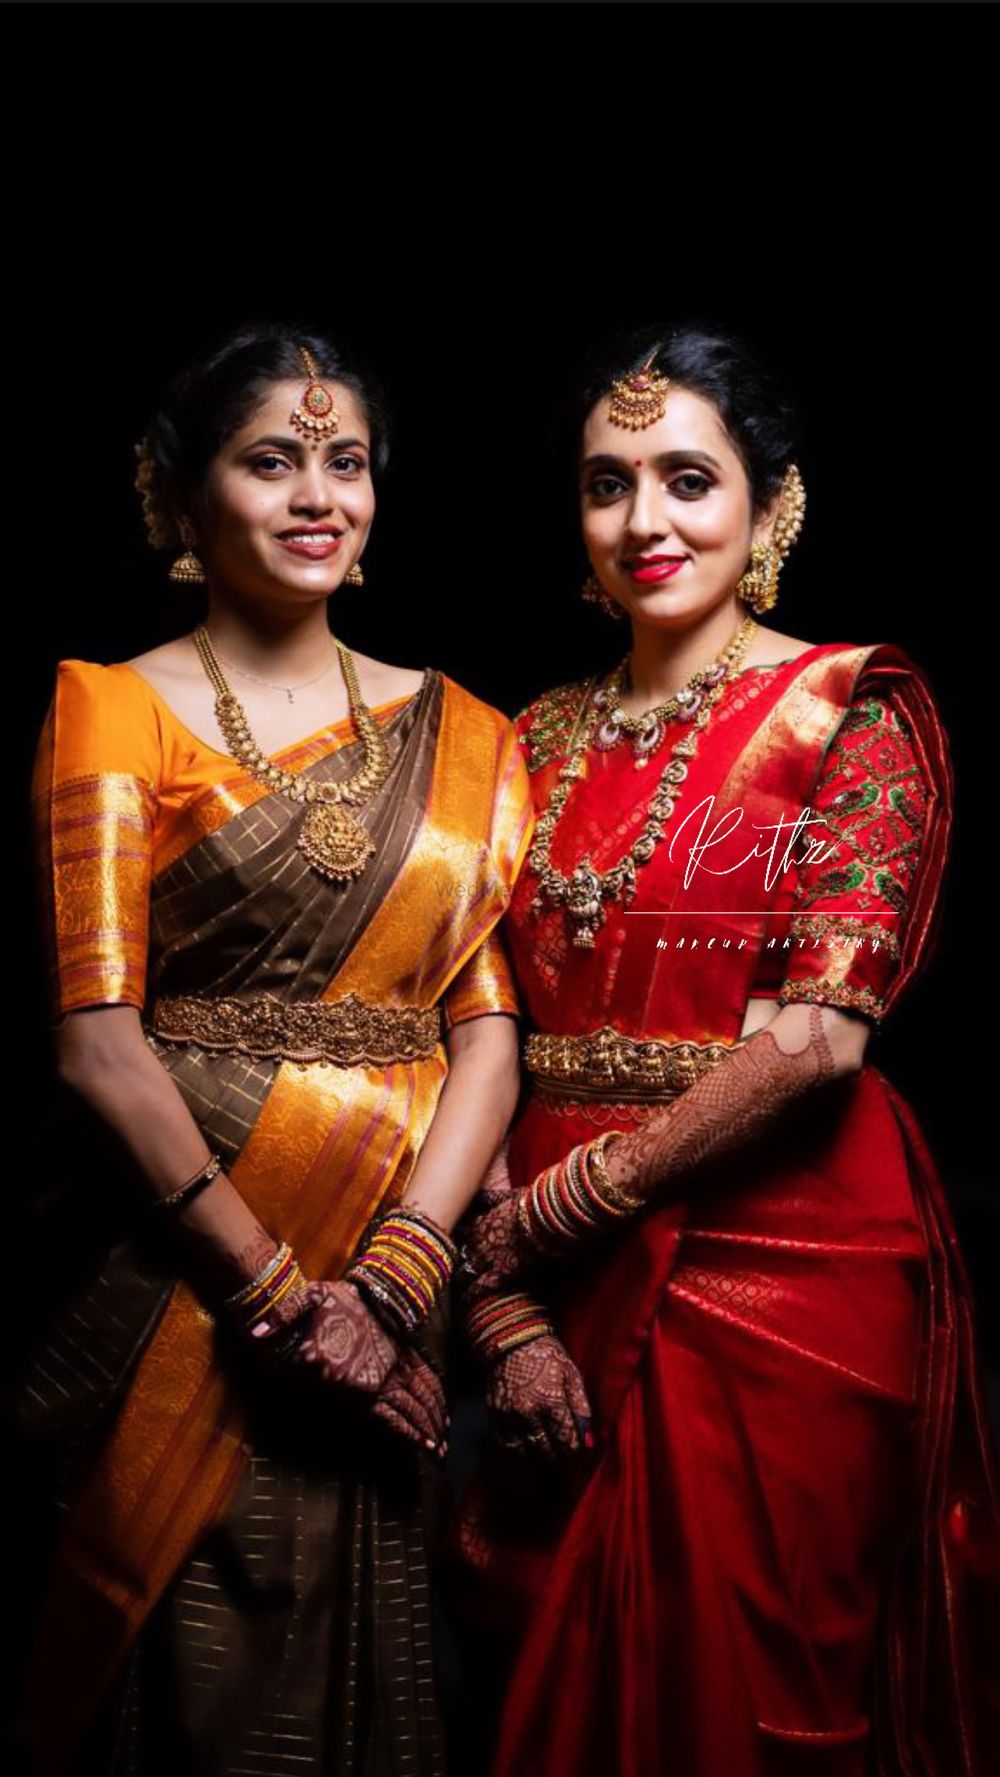 Photo From brides of 2021  - By Rithz Makeup Artistry 